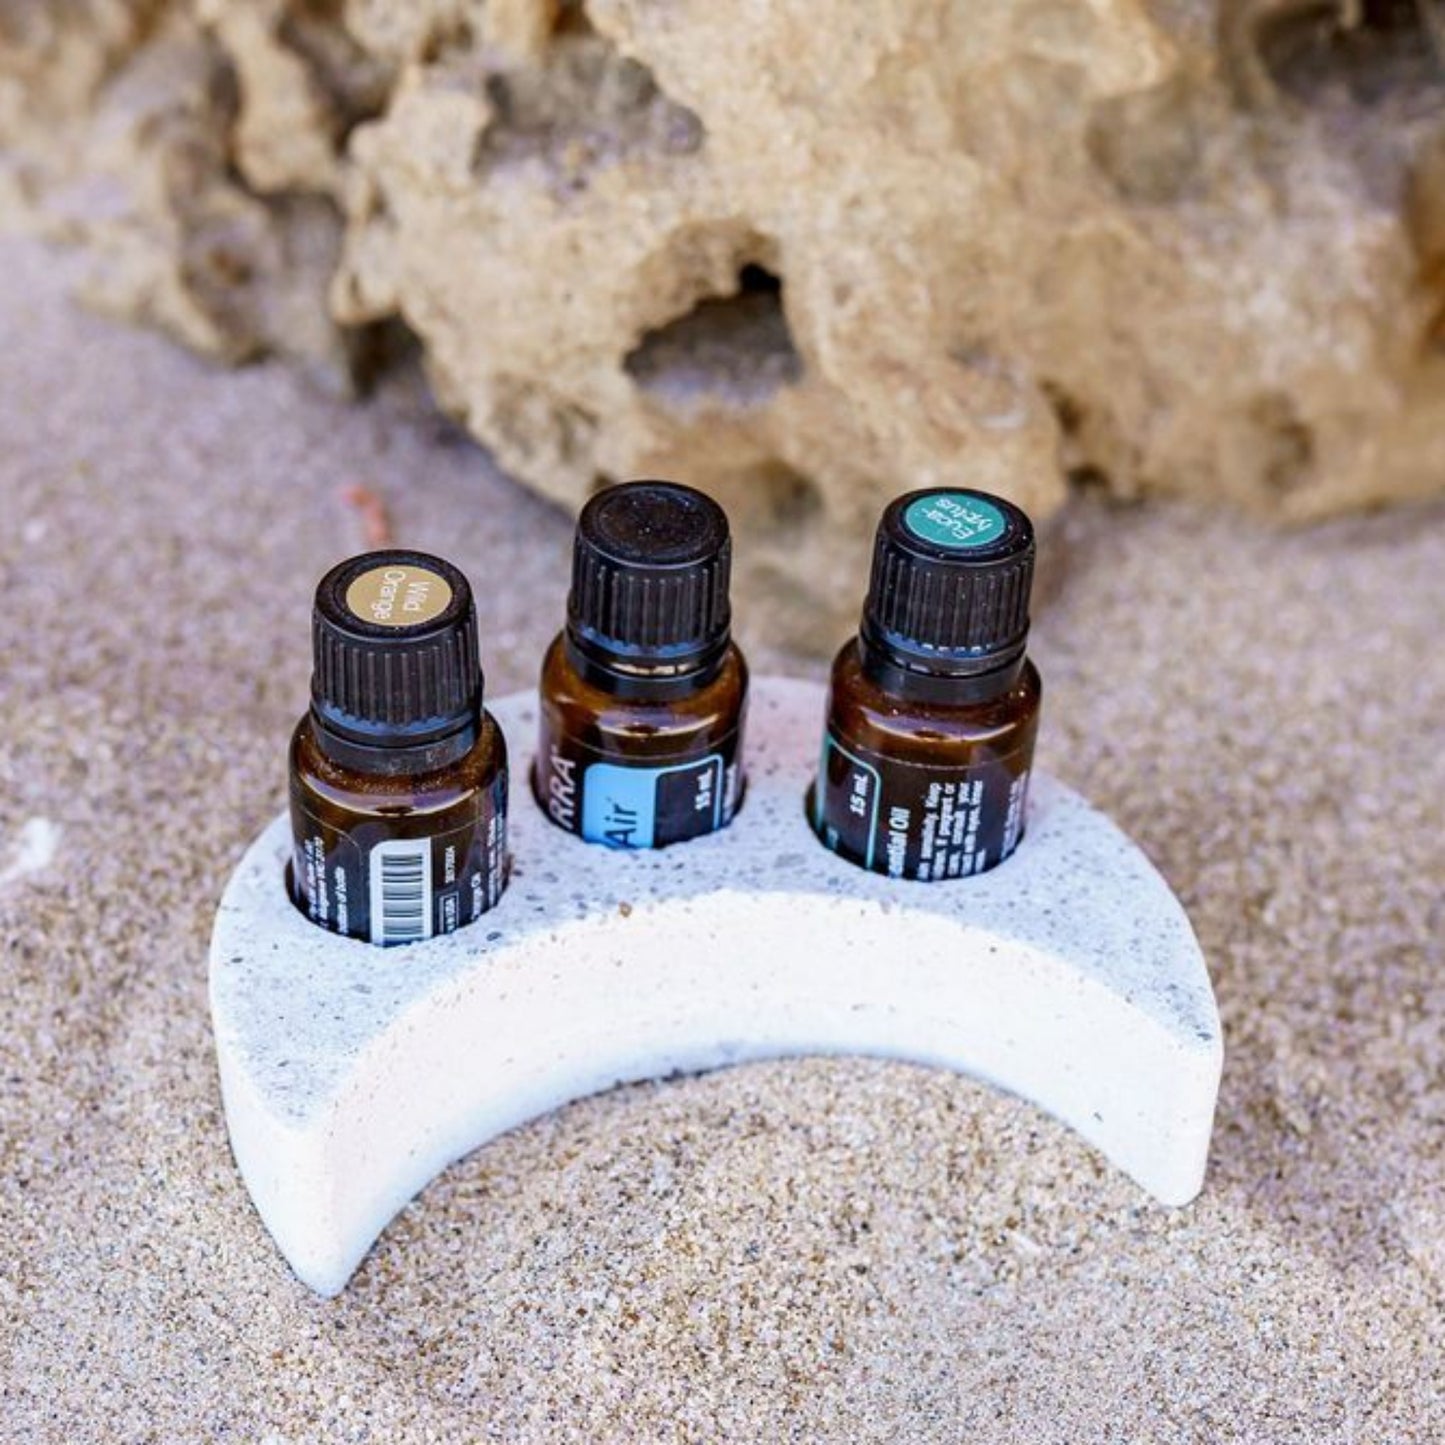 Crescent moon essential oil tray and three essential oil bottles